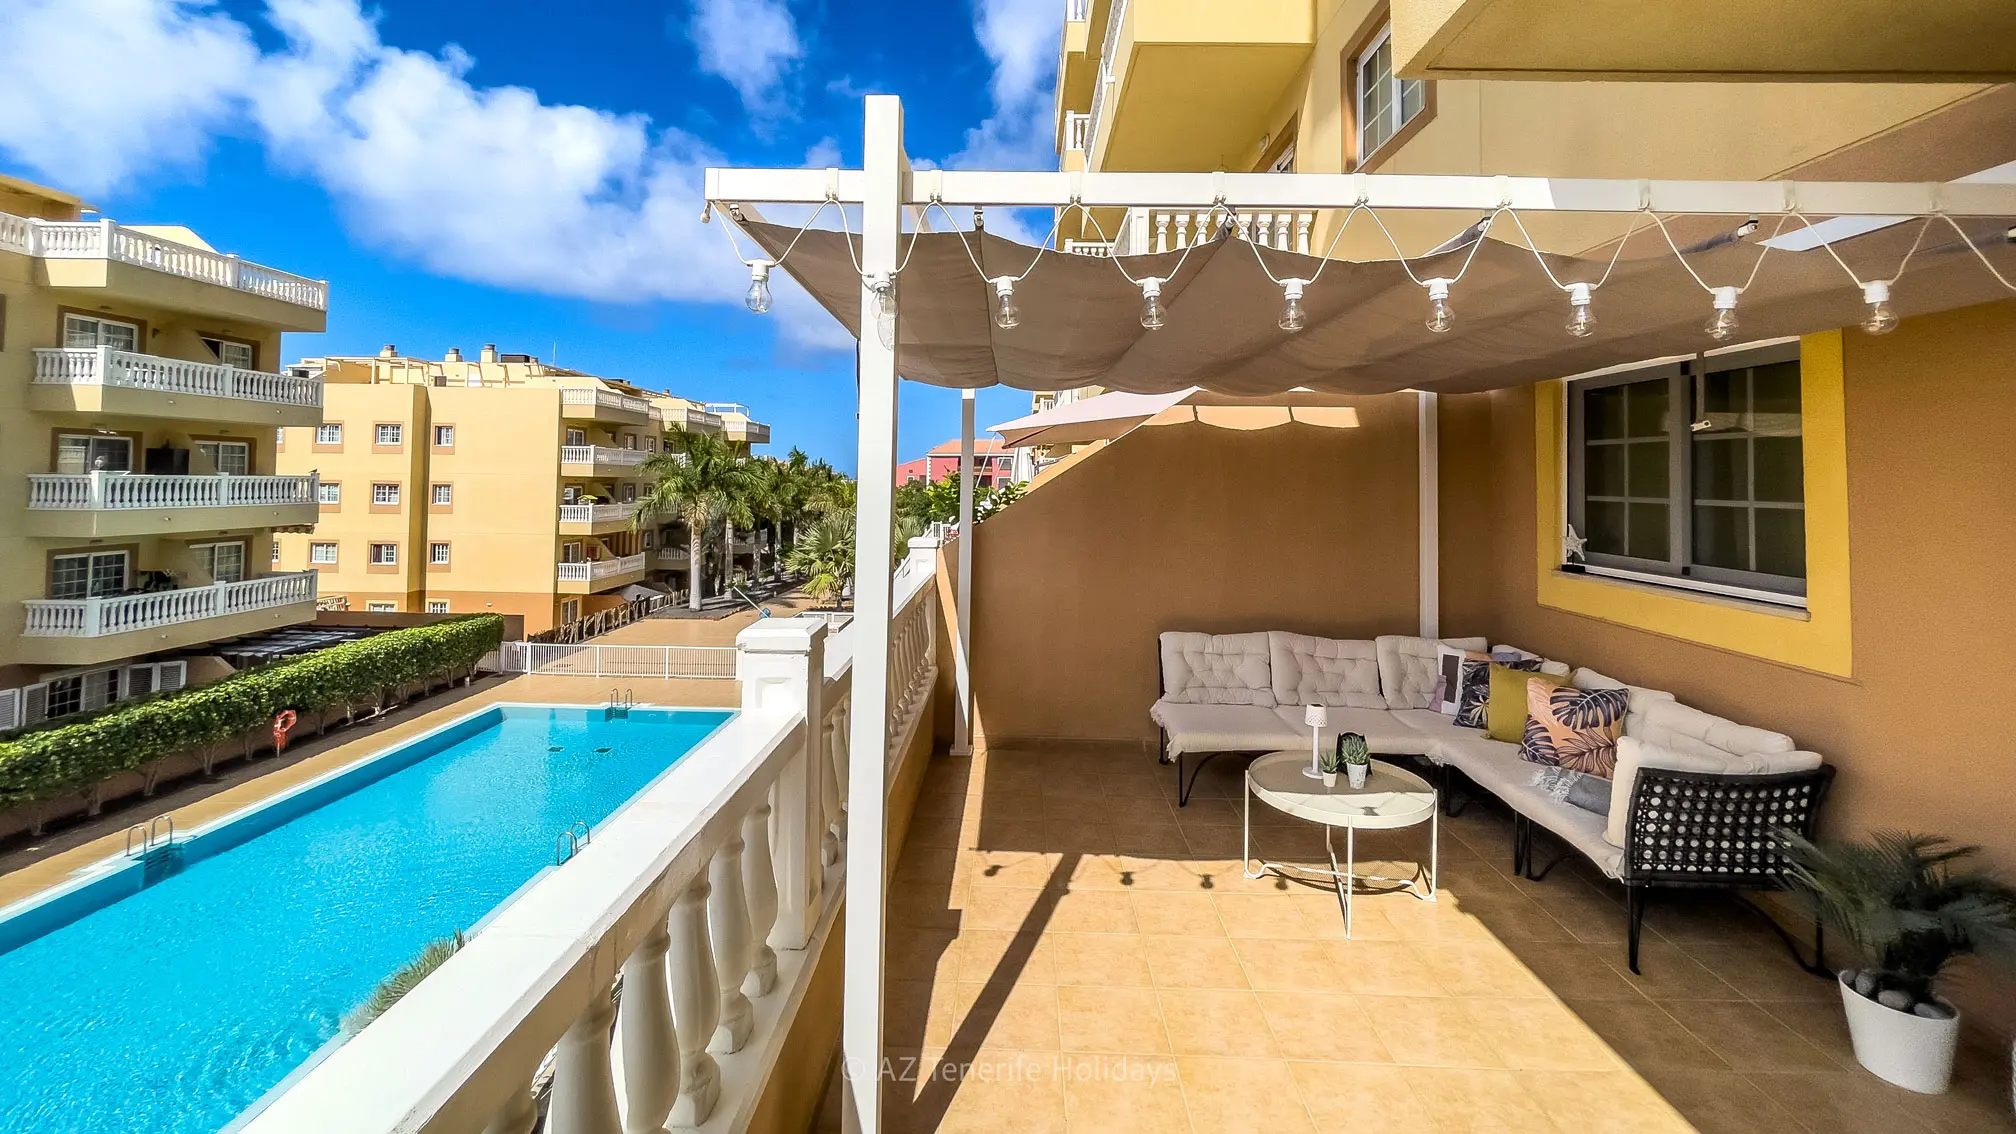 Sunny terrace with pool views at Tenerife Relax Apartment